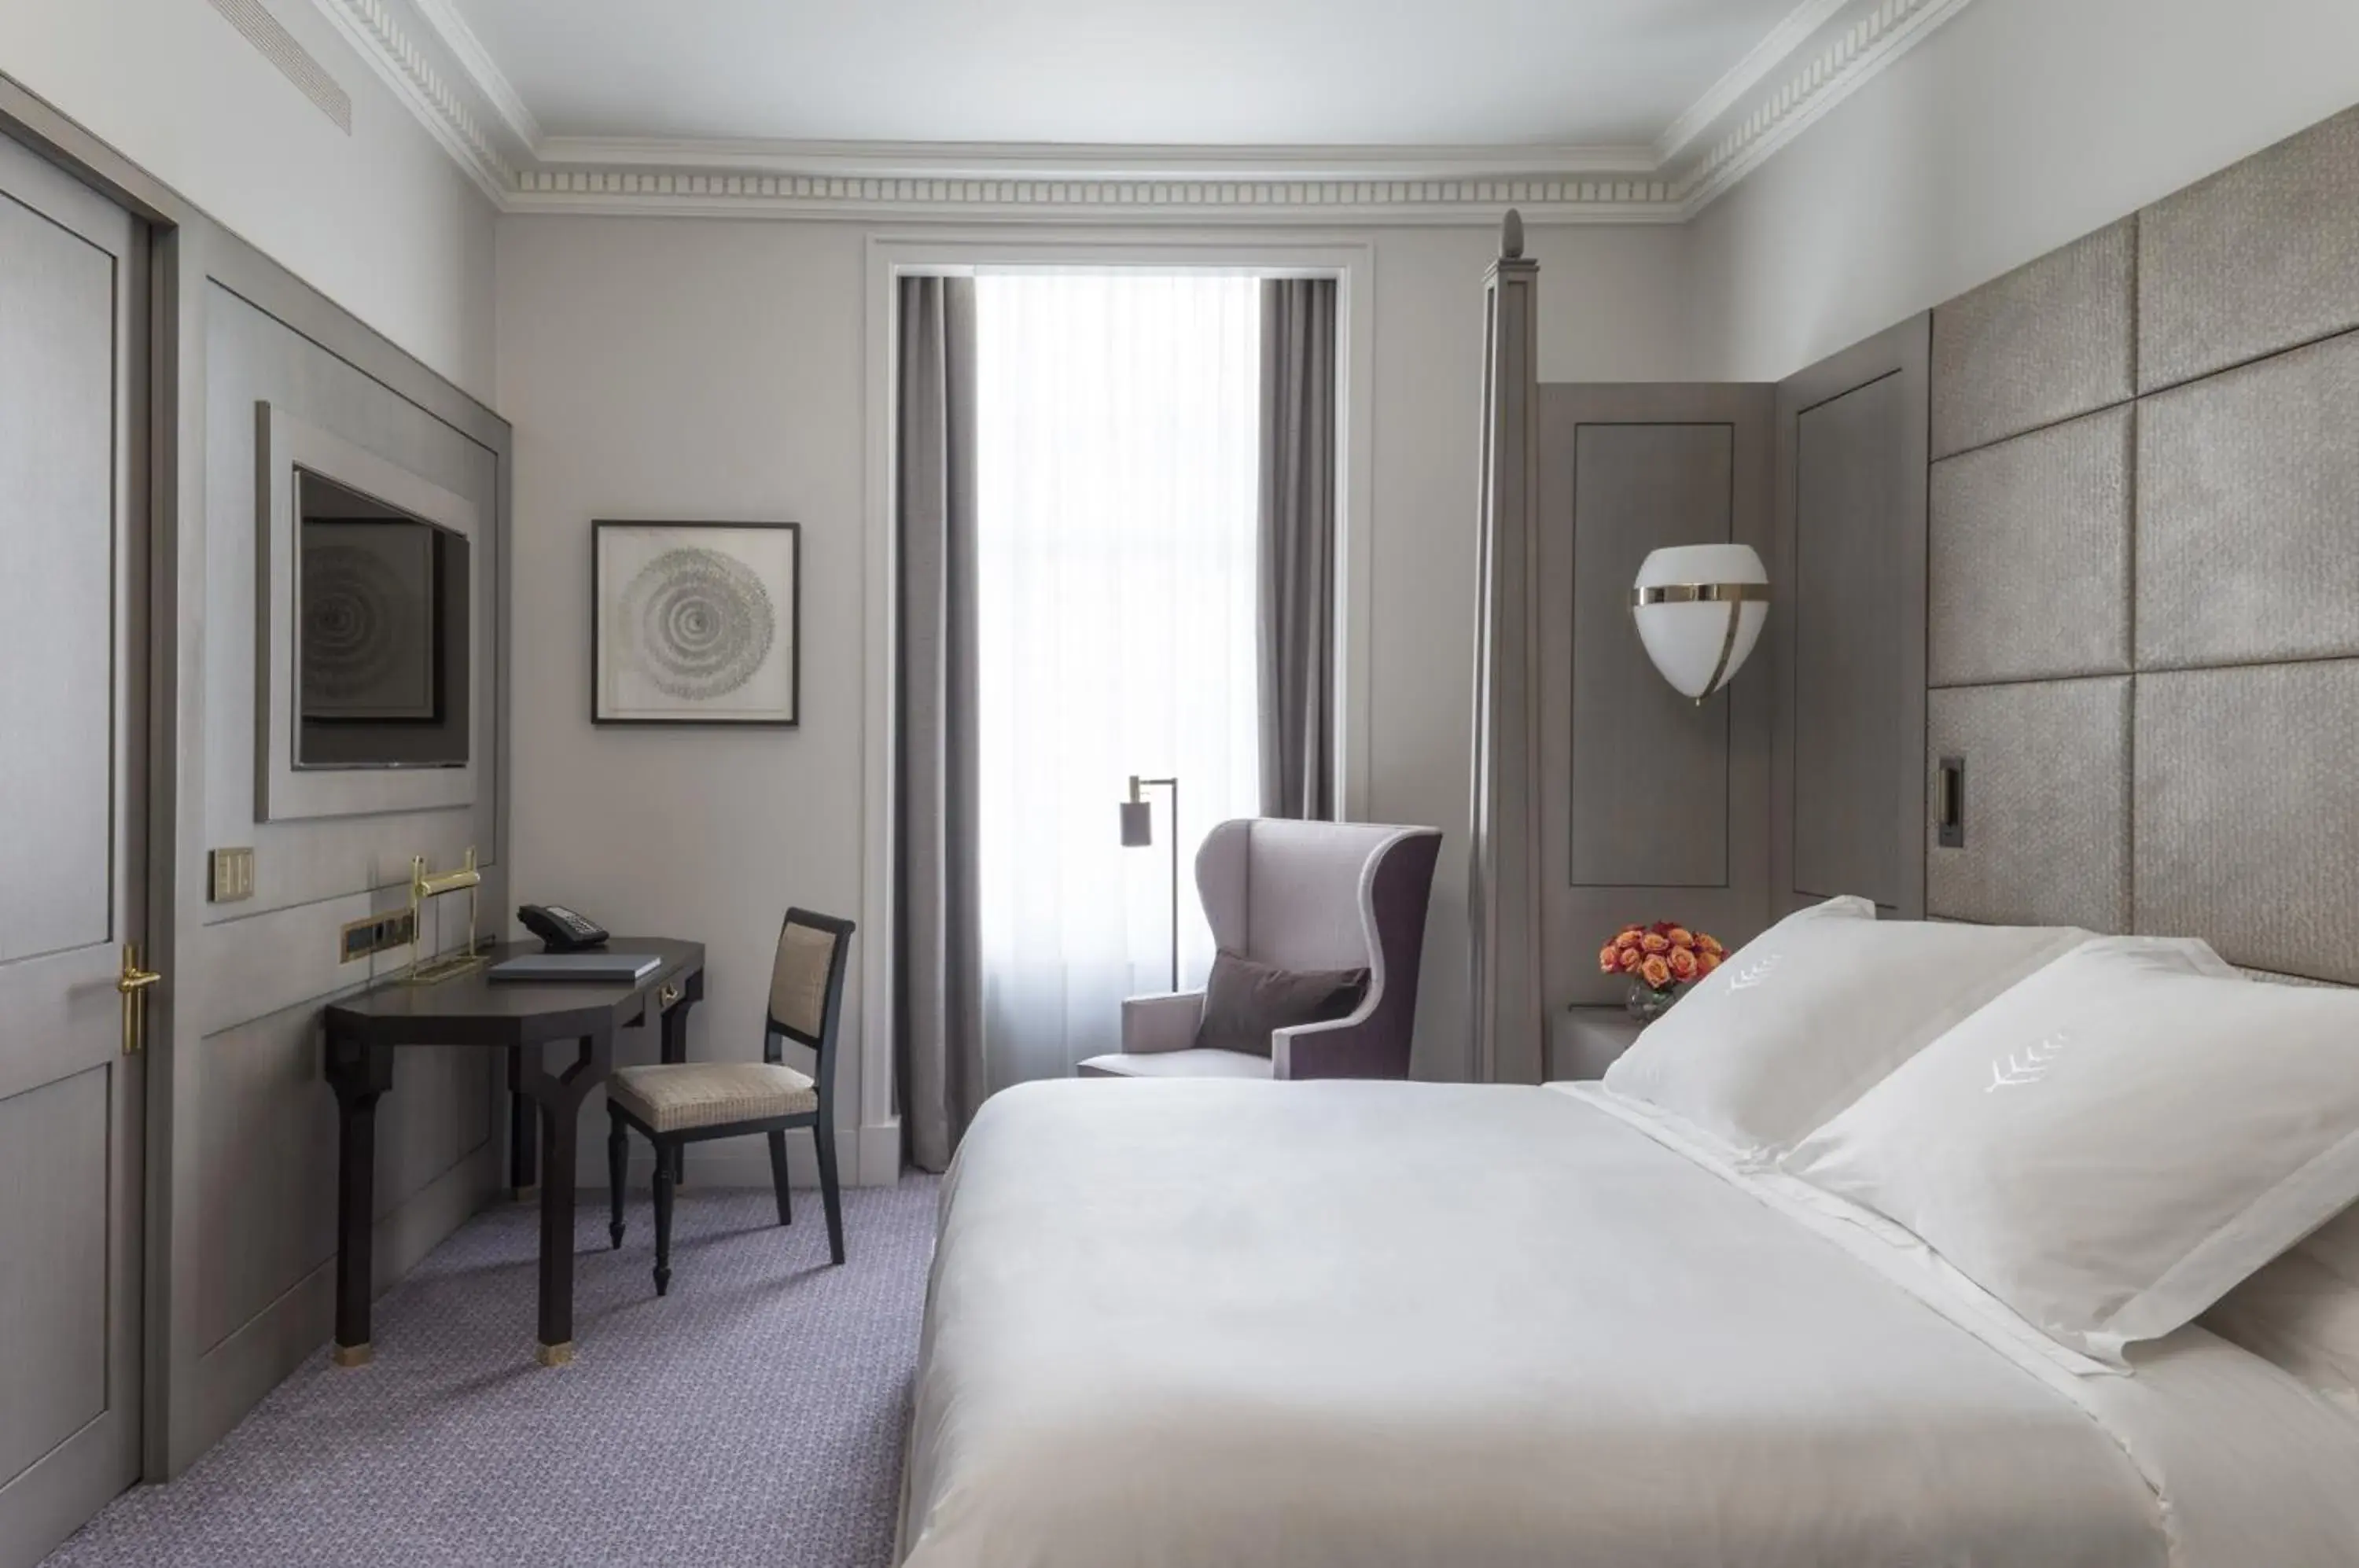 Bedroom, Room Photo in Four Seasons Hotel London at Ten Trinity Square